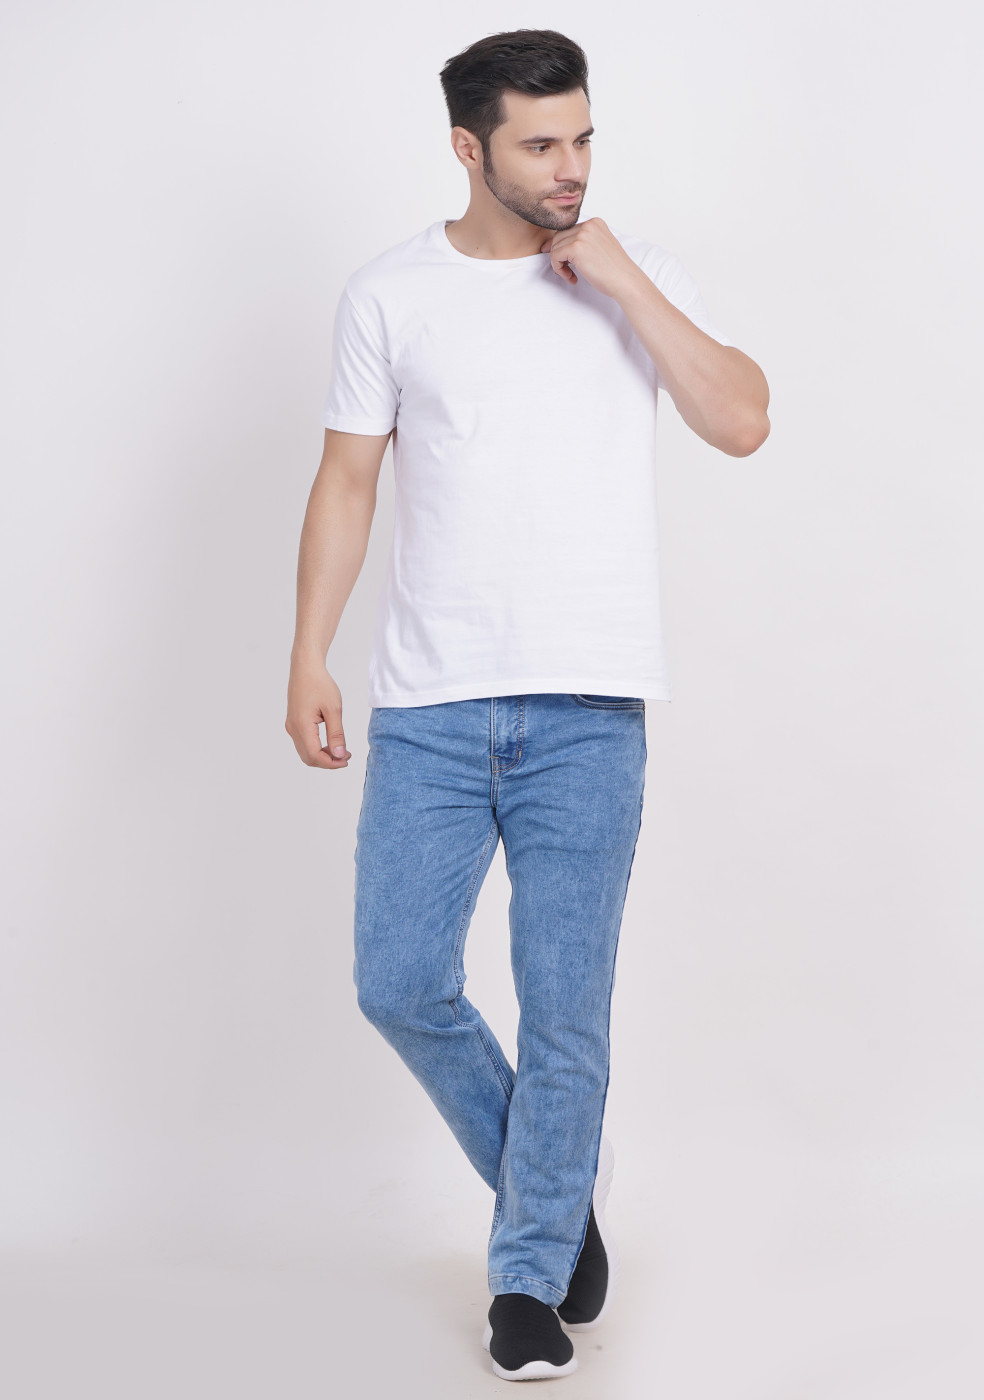 Buy online Blue Denim Jeans from Clothing for Men by Ankit